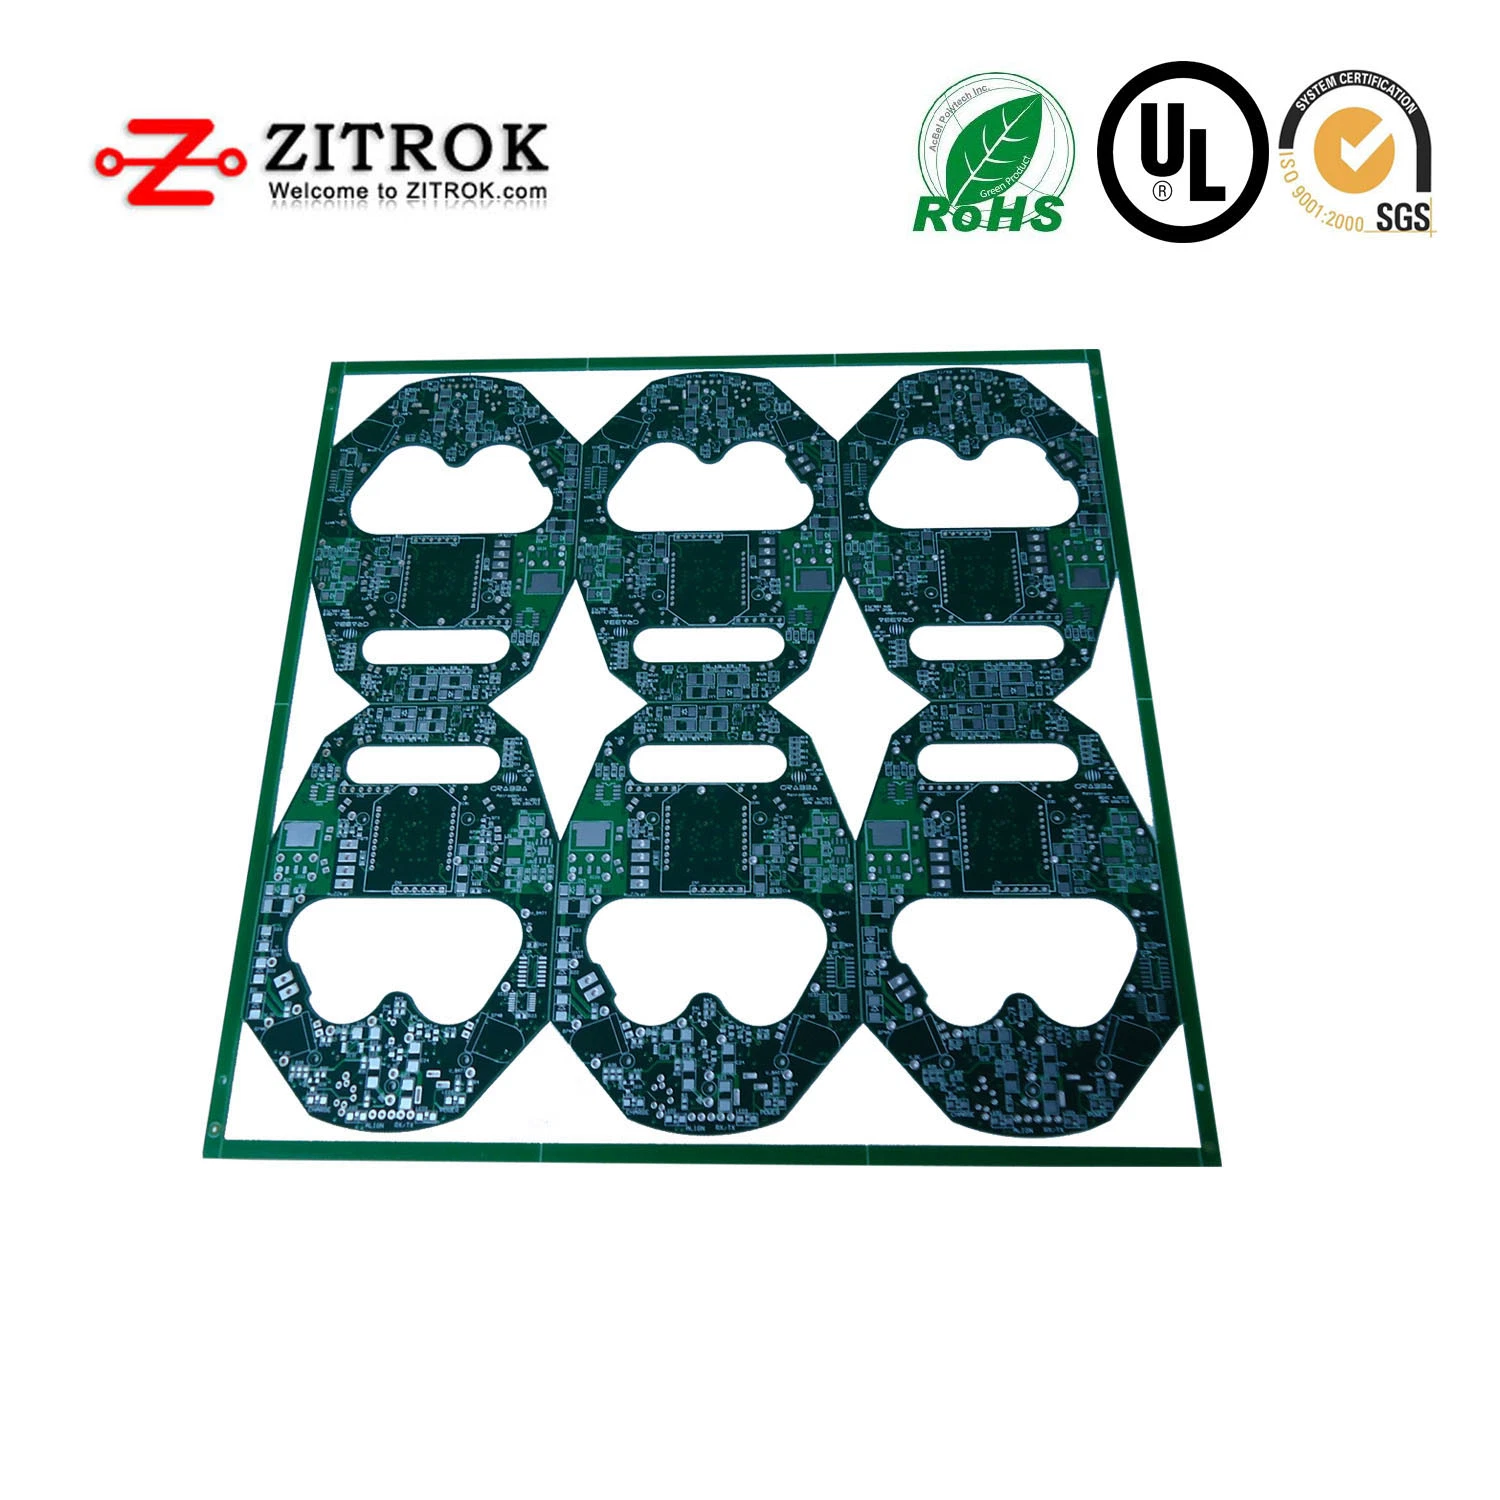 High-Density Interconnect PCB Board PCBA Manufacturing OEM HDI PCB Electronics Motherboard PCB Assembly